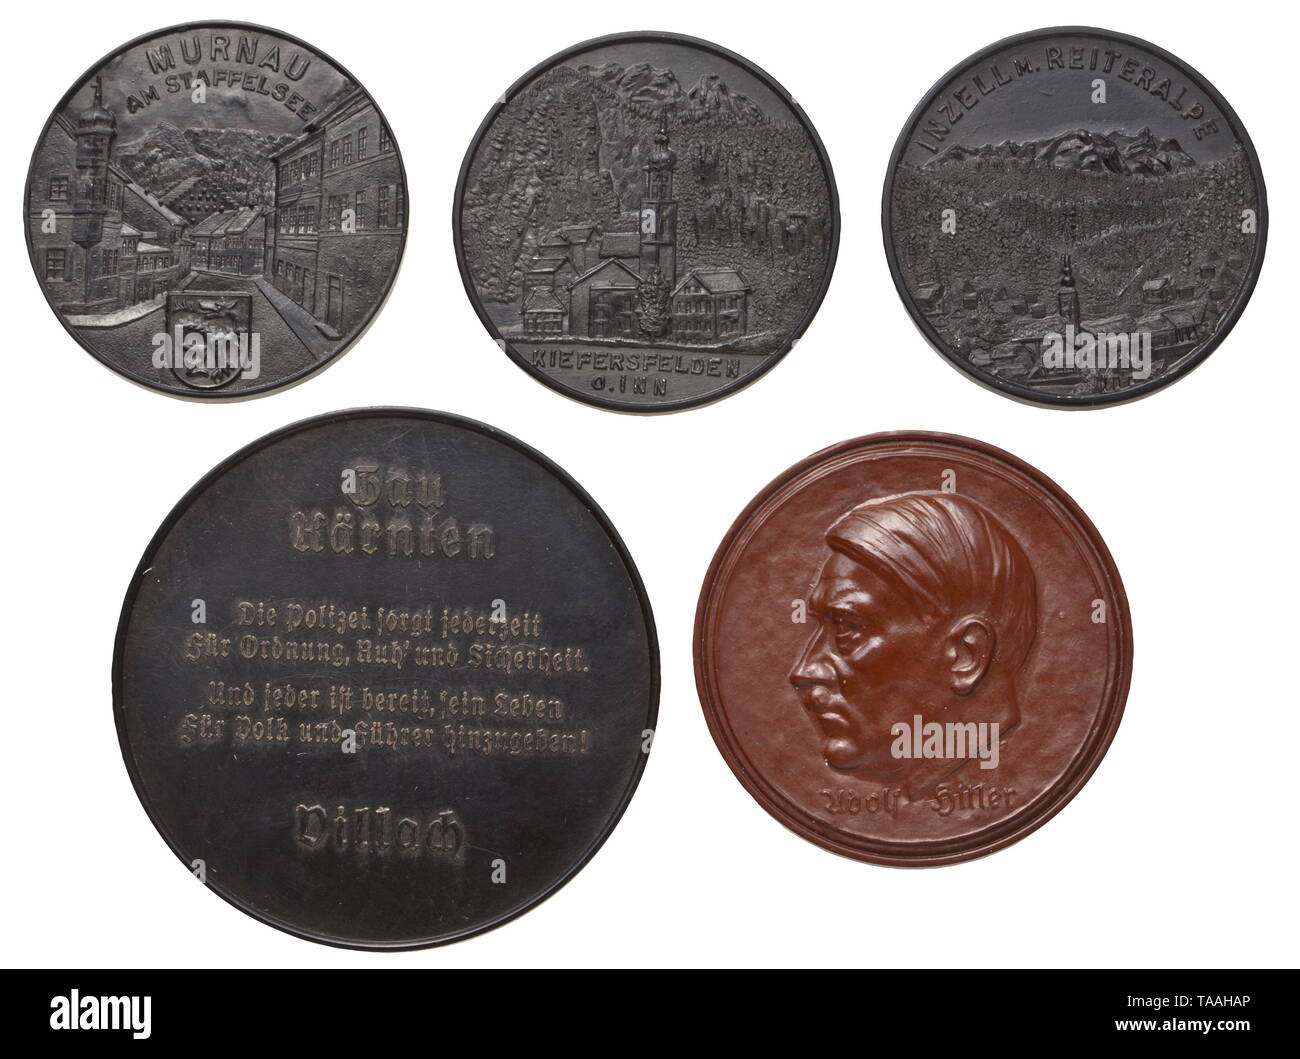 Mountain troops of the Waffen-SS - five Bakelite plaques Three plaques with inscription (tr.) 'SS Sign up voluntarily for the mountain troops of the Waffen-SS', views of Murnau, Inzell and Kiefersfelden on the reverse, diameter of each circa 40 mm. Furthermore, a brown plaque inscribed (tr.) 'SS Leibstandarte-SS Adolf Hitler enlistment at the age of 17', the reverse with a portrait of Hitler, diameter 45 mm. Plaque (tr.) 'Day of the German police force - 14-15 February 1942', Gau Kärnten Villach on the reverse, diameter 55 mm. Slight traces of age. historic, historical, 20t, Editorial-Use-Only Stock Photo